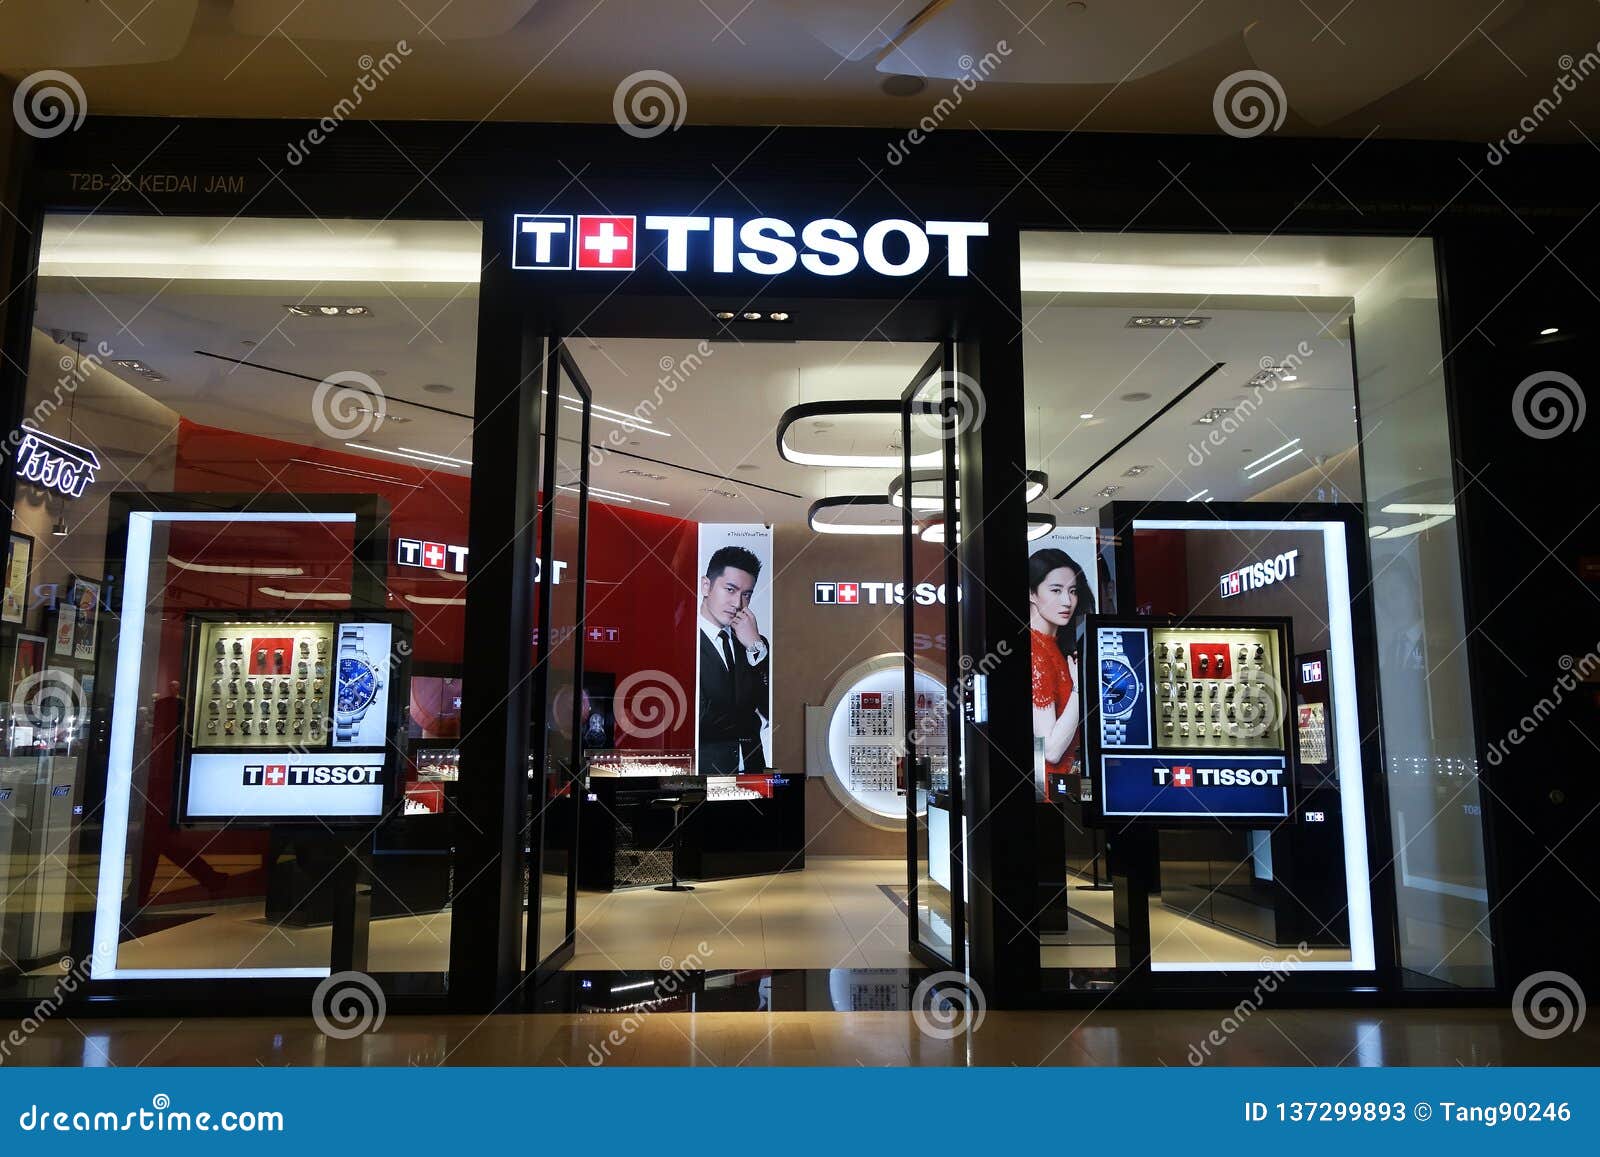 Tissot Swiss Watch Store At Genting Highlands, Malaysia ...